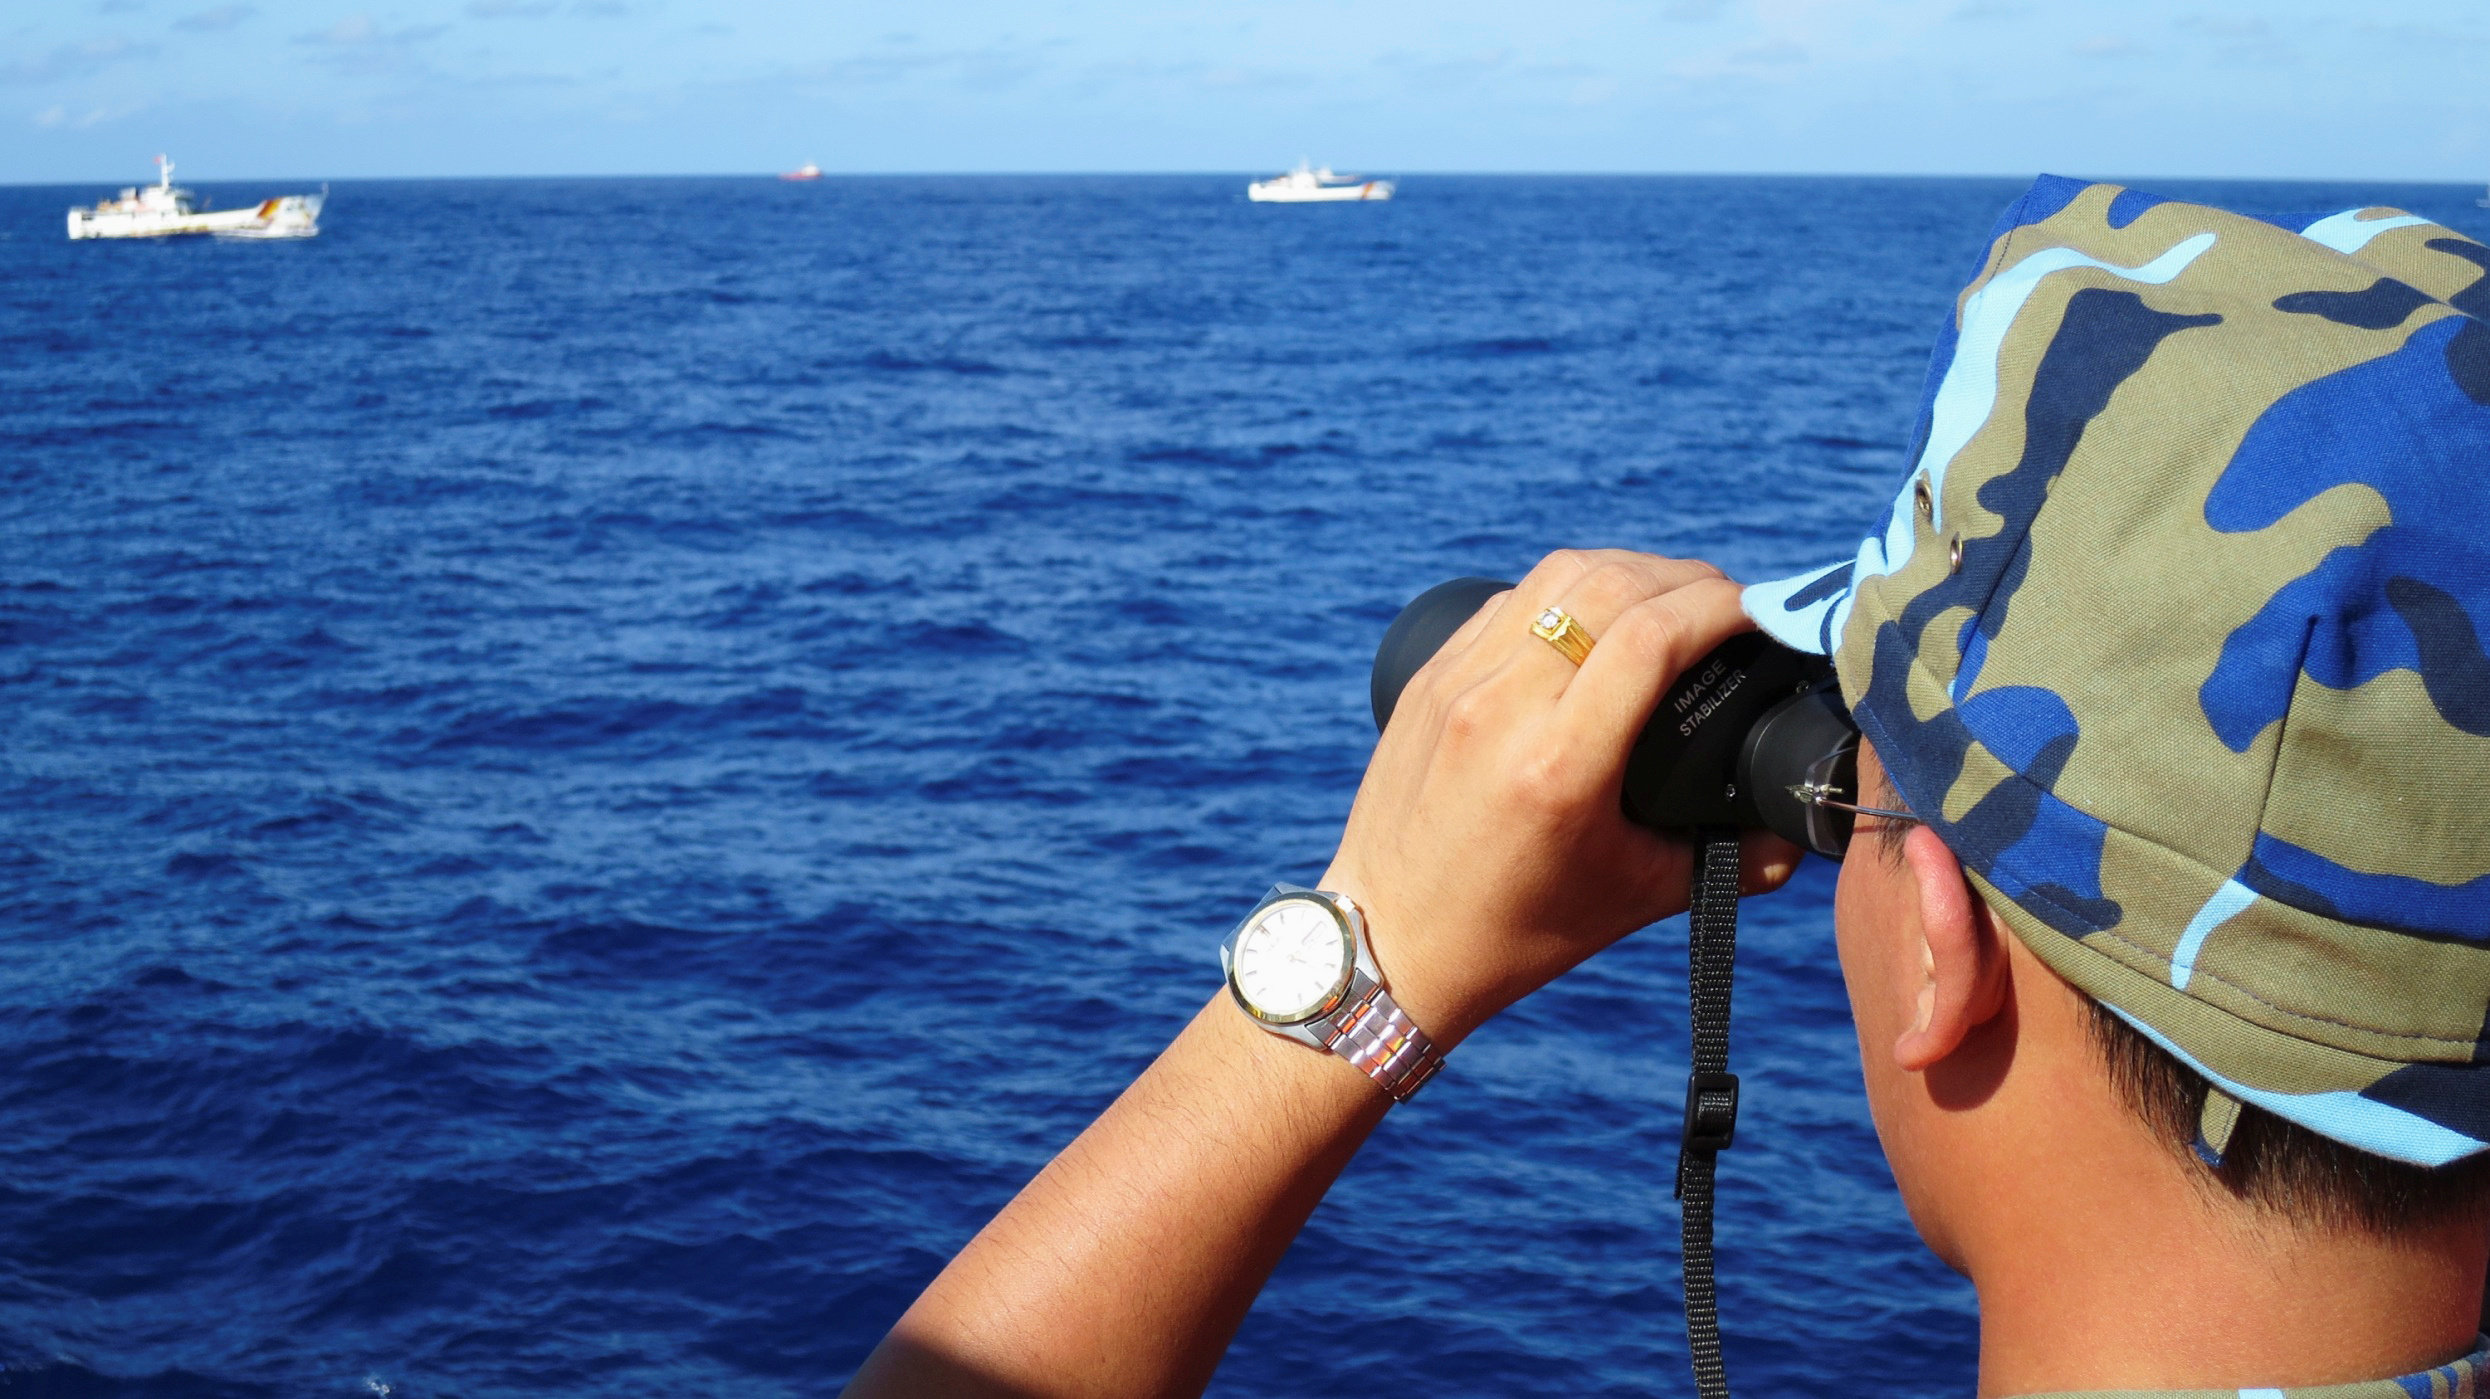 A member of the Vietnamese coastguard looks out to sea at Chinese coastguard vessels off the coast of Vietnam in 2014. Hanoi has a long, contentious history with Beijing in the disputed waterway Photo: Reuters